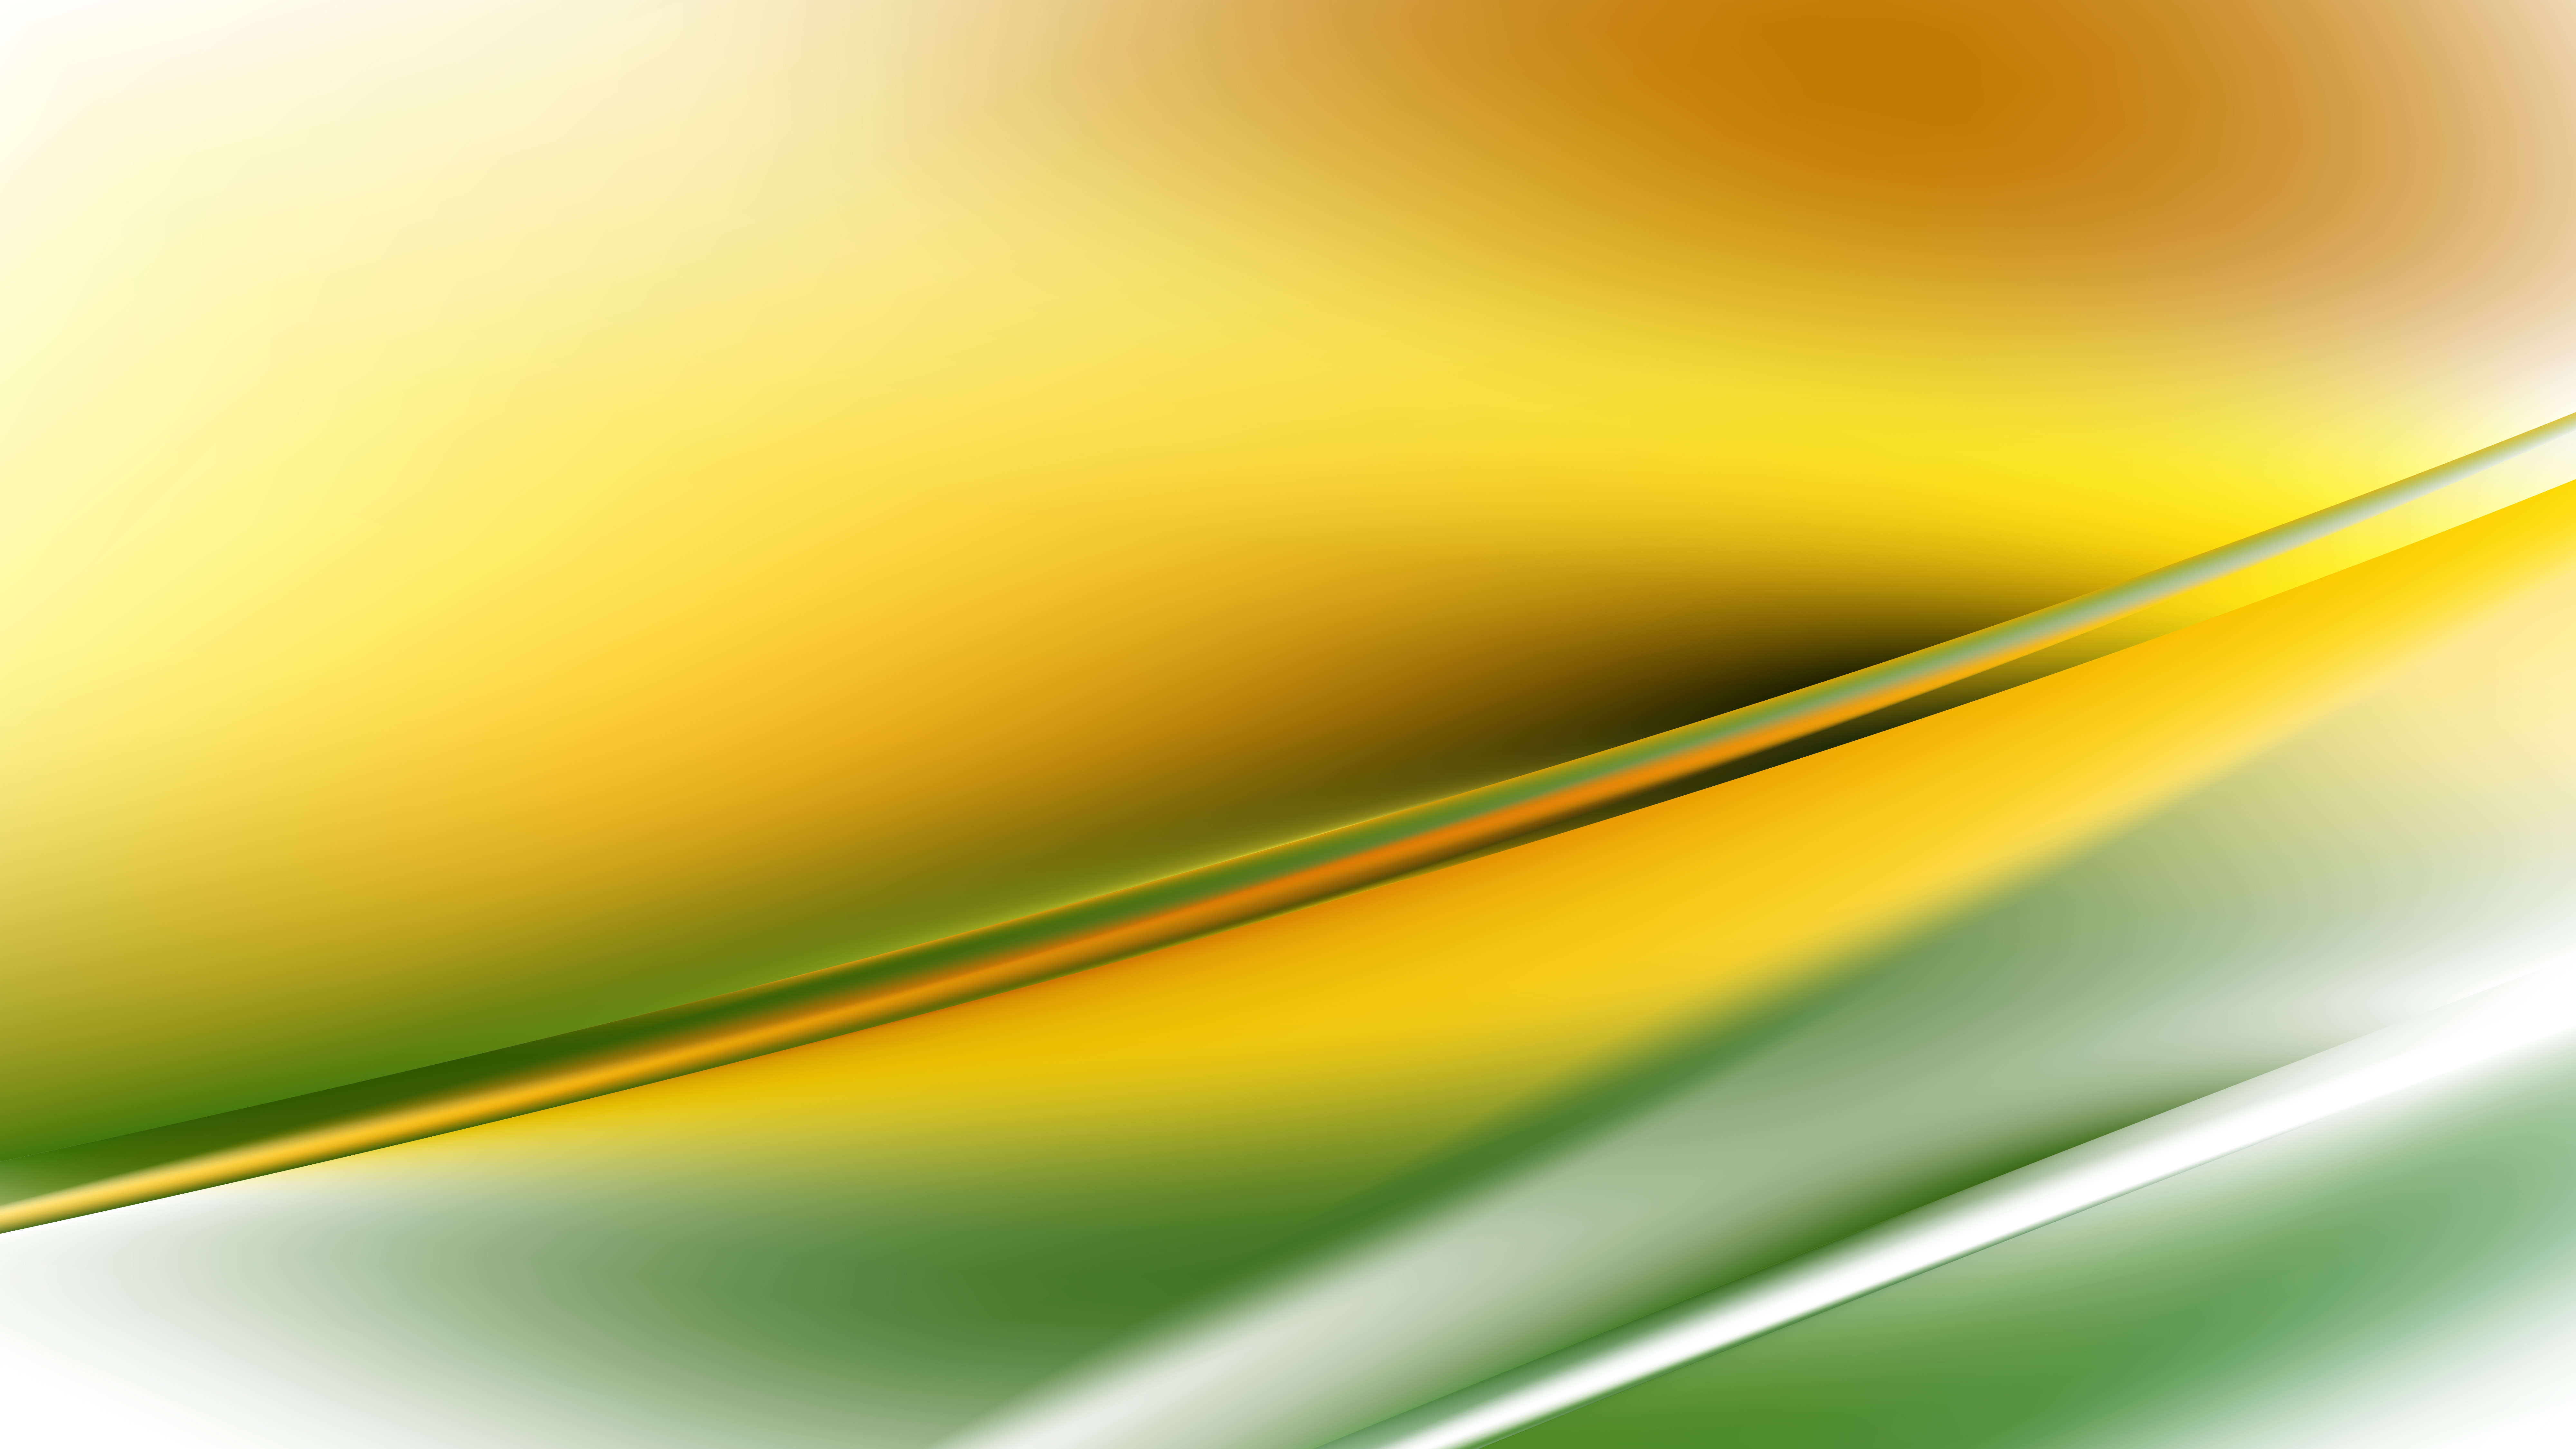 Free Green Yellow and White Diagonal Shiny Lines Background Vector  Illustration